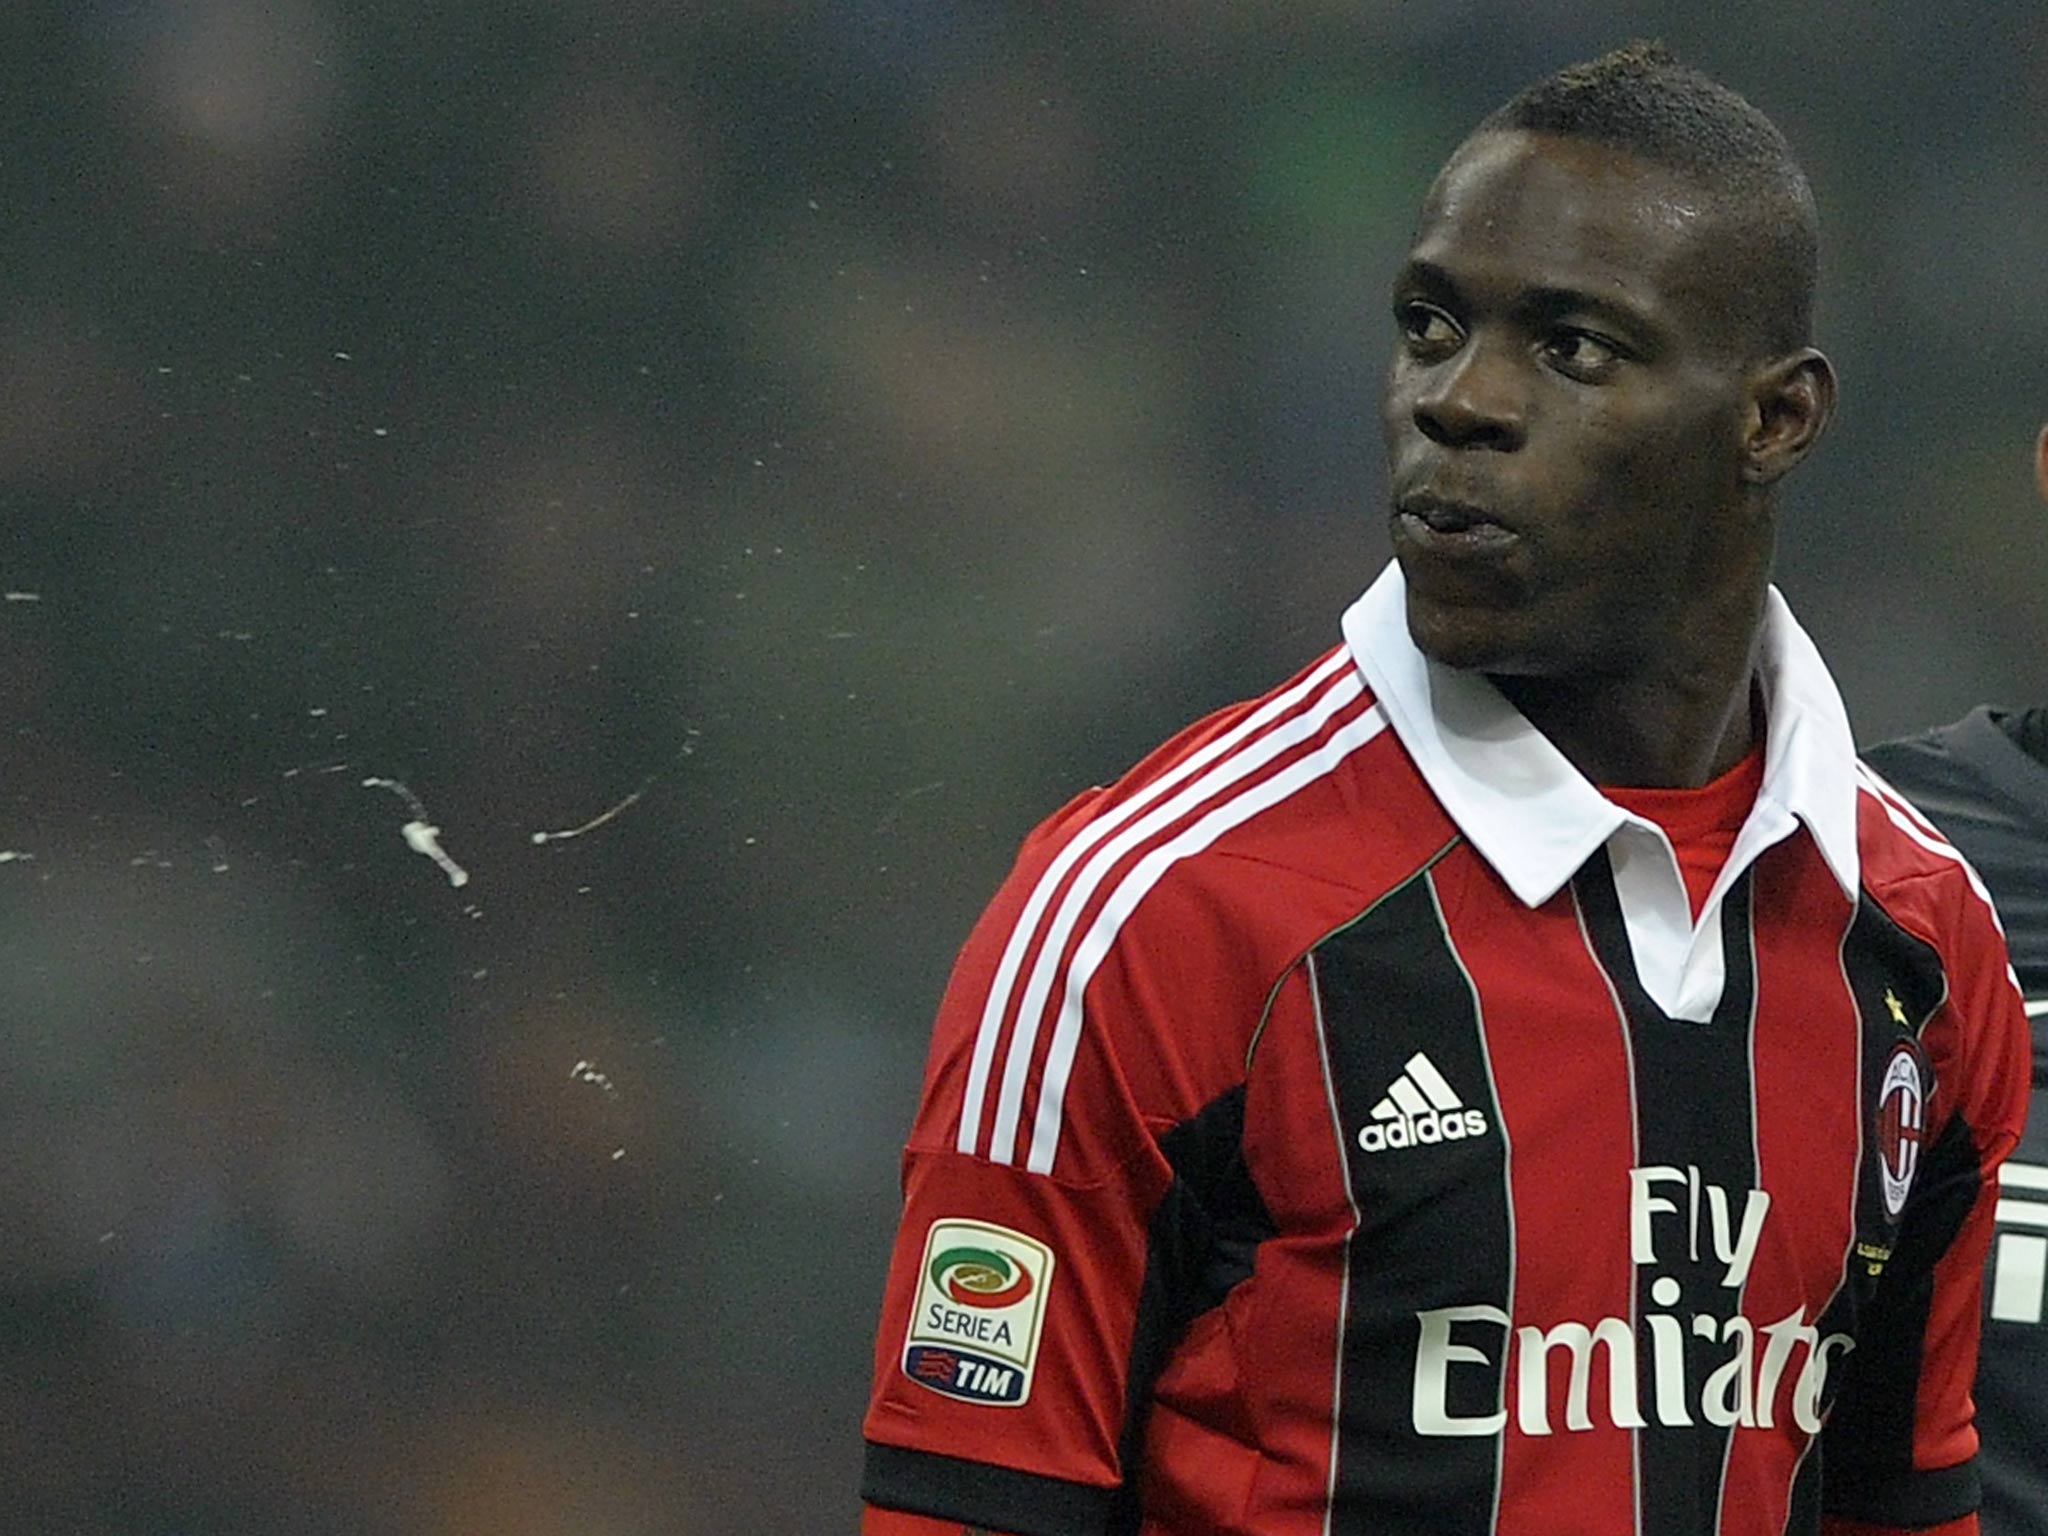 Mario Balotelli pictured during the Milan derby